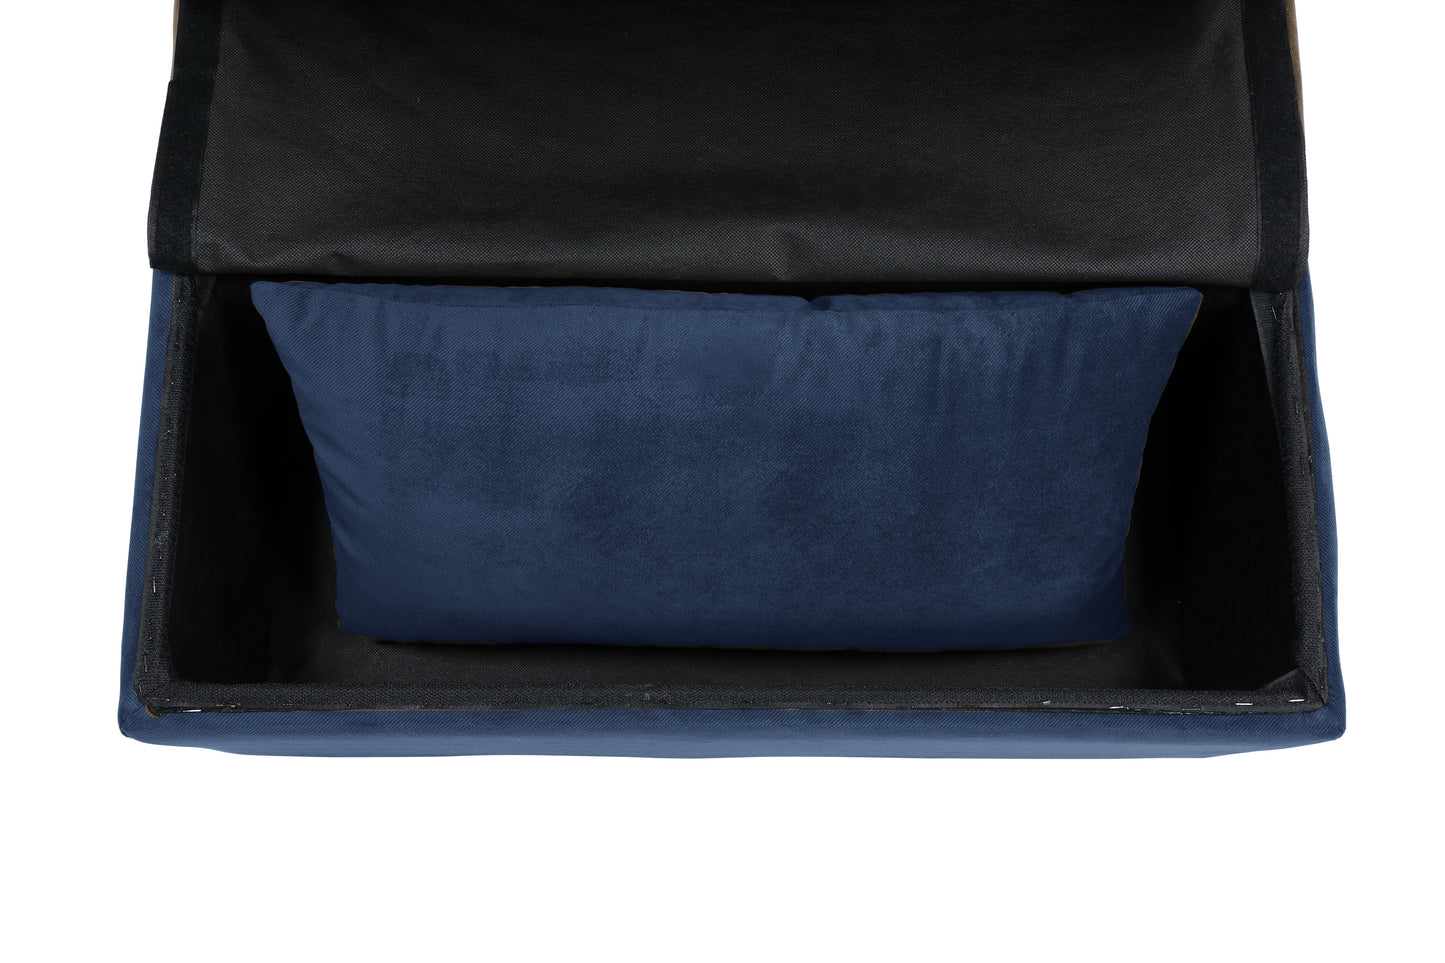 Garrell Lift Top Storage Ottoman with Pull-out Bed BLUE